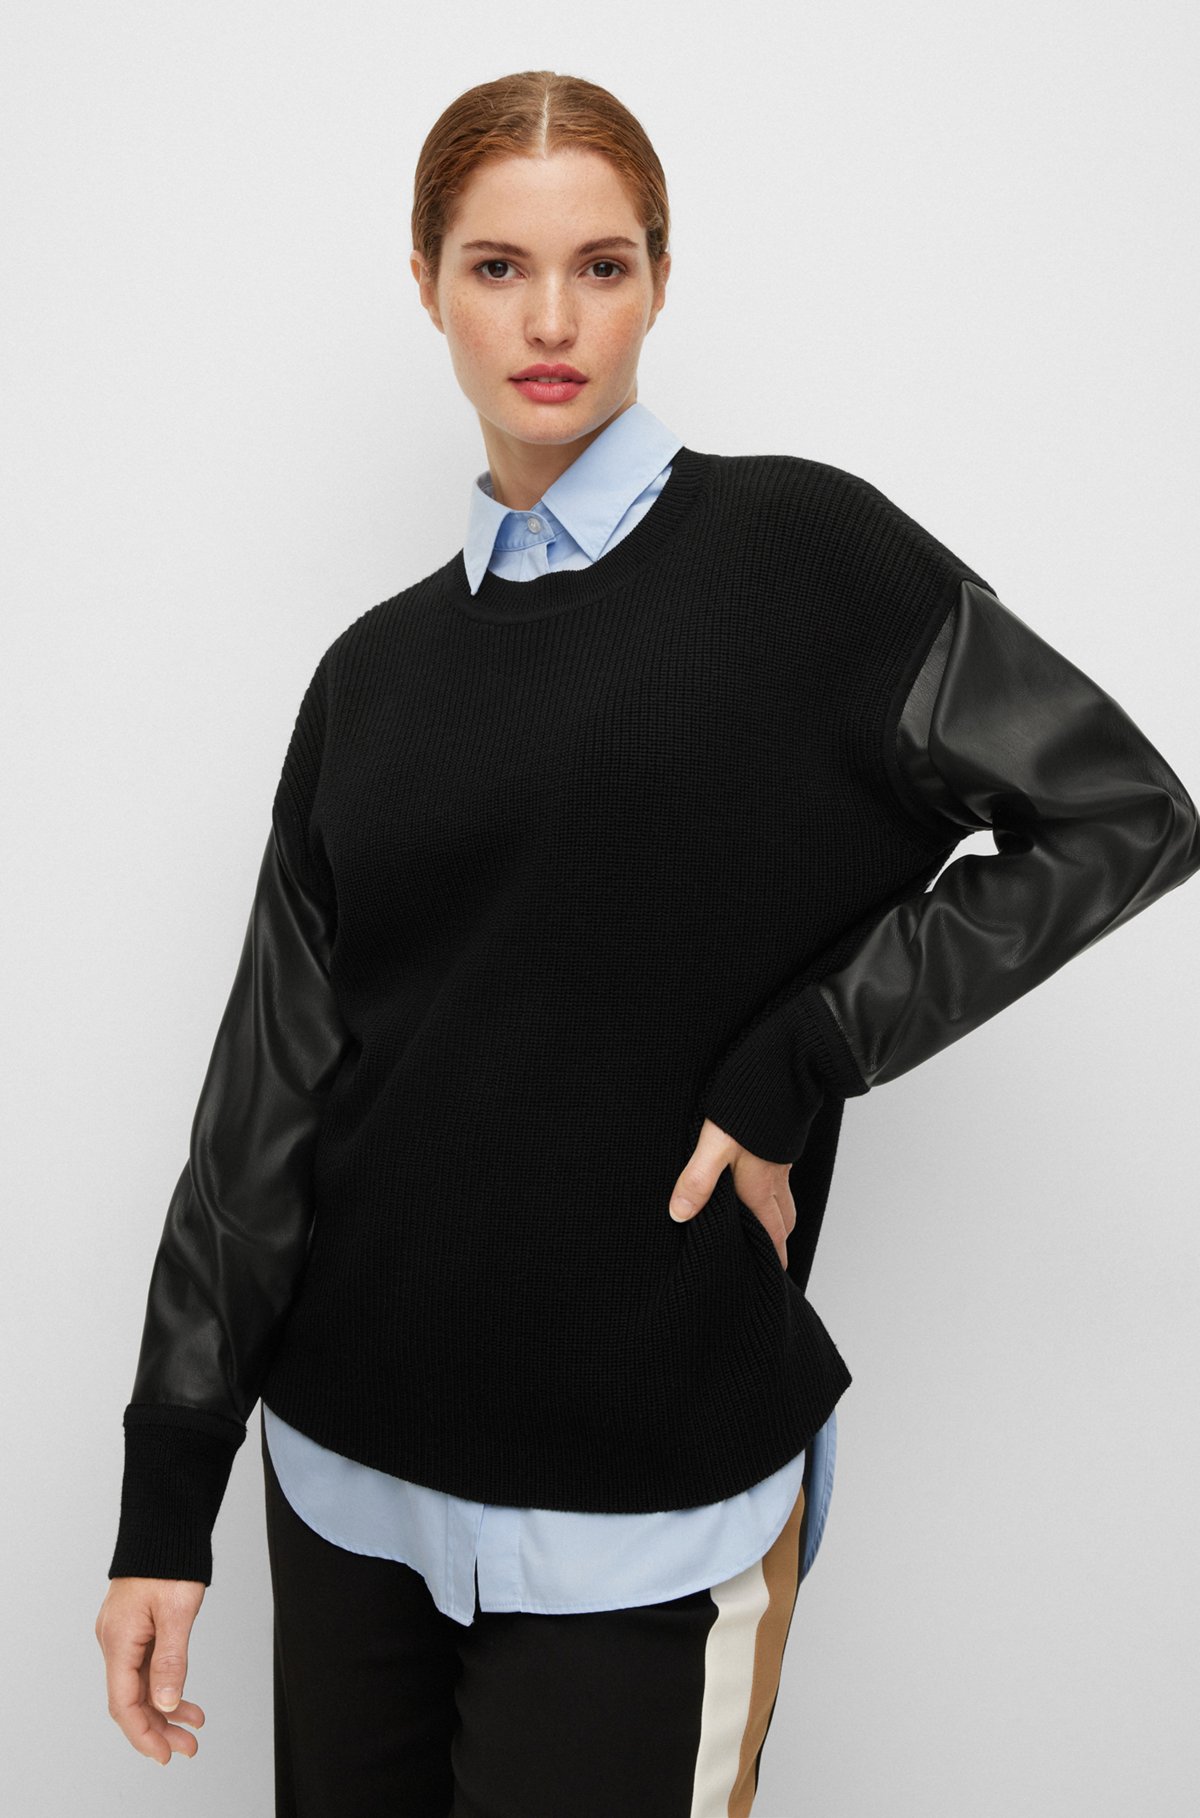 Virgin-wool sweater with faux-leather sleeves, Black